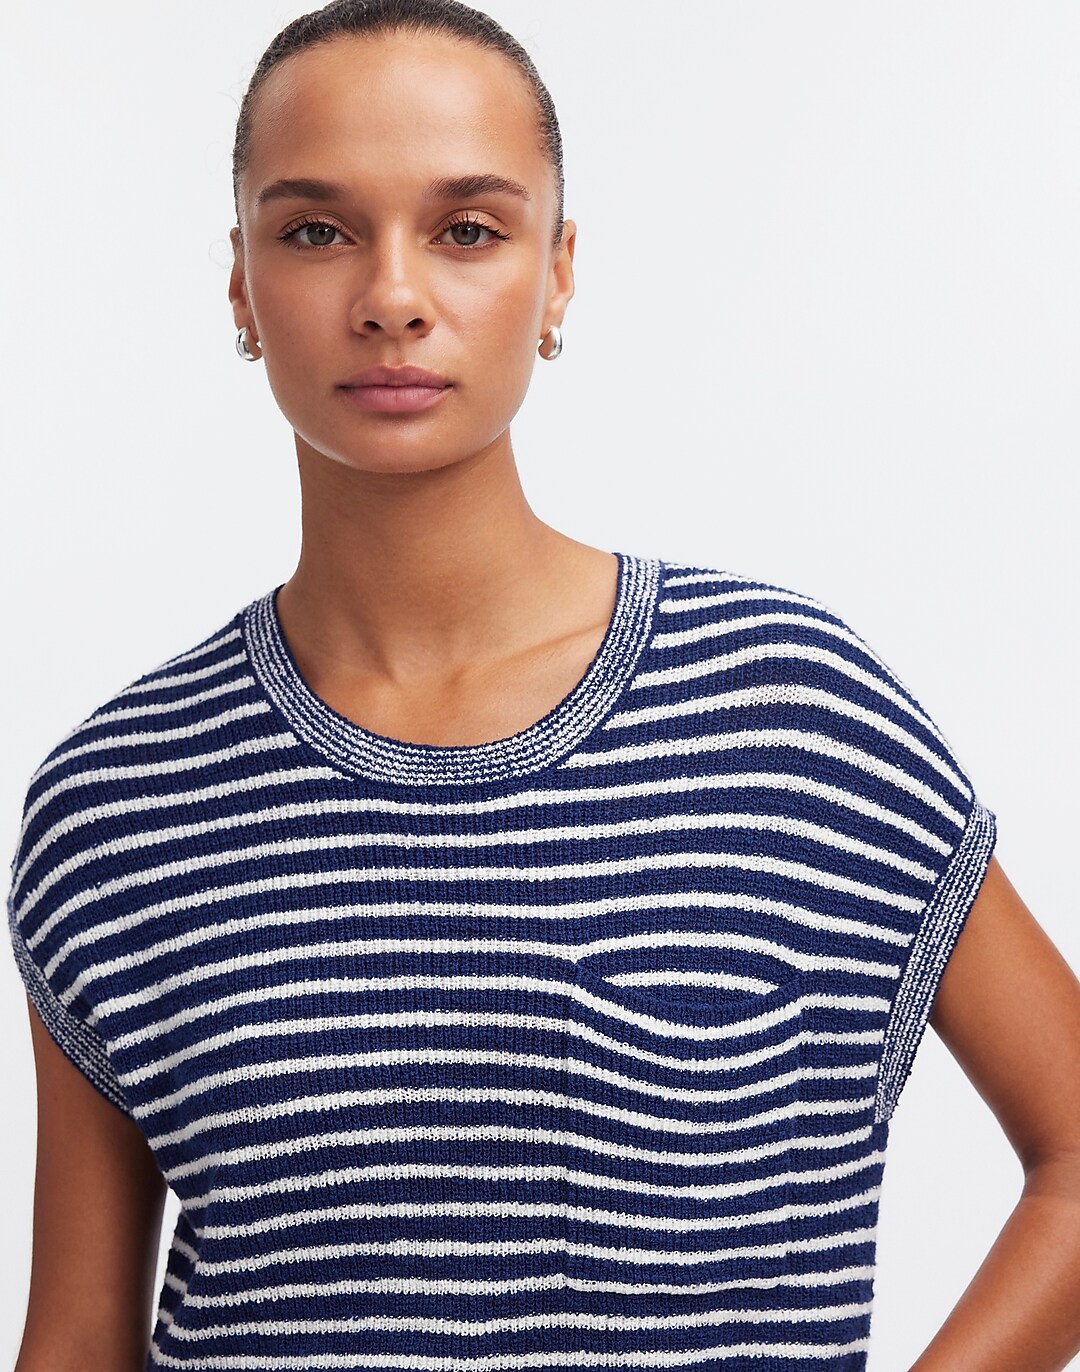 Ribbed Pocket Sweater Tee in Stripe | Madewell